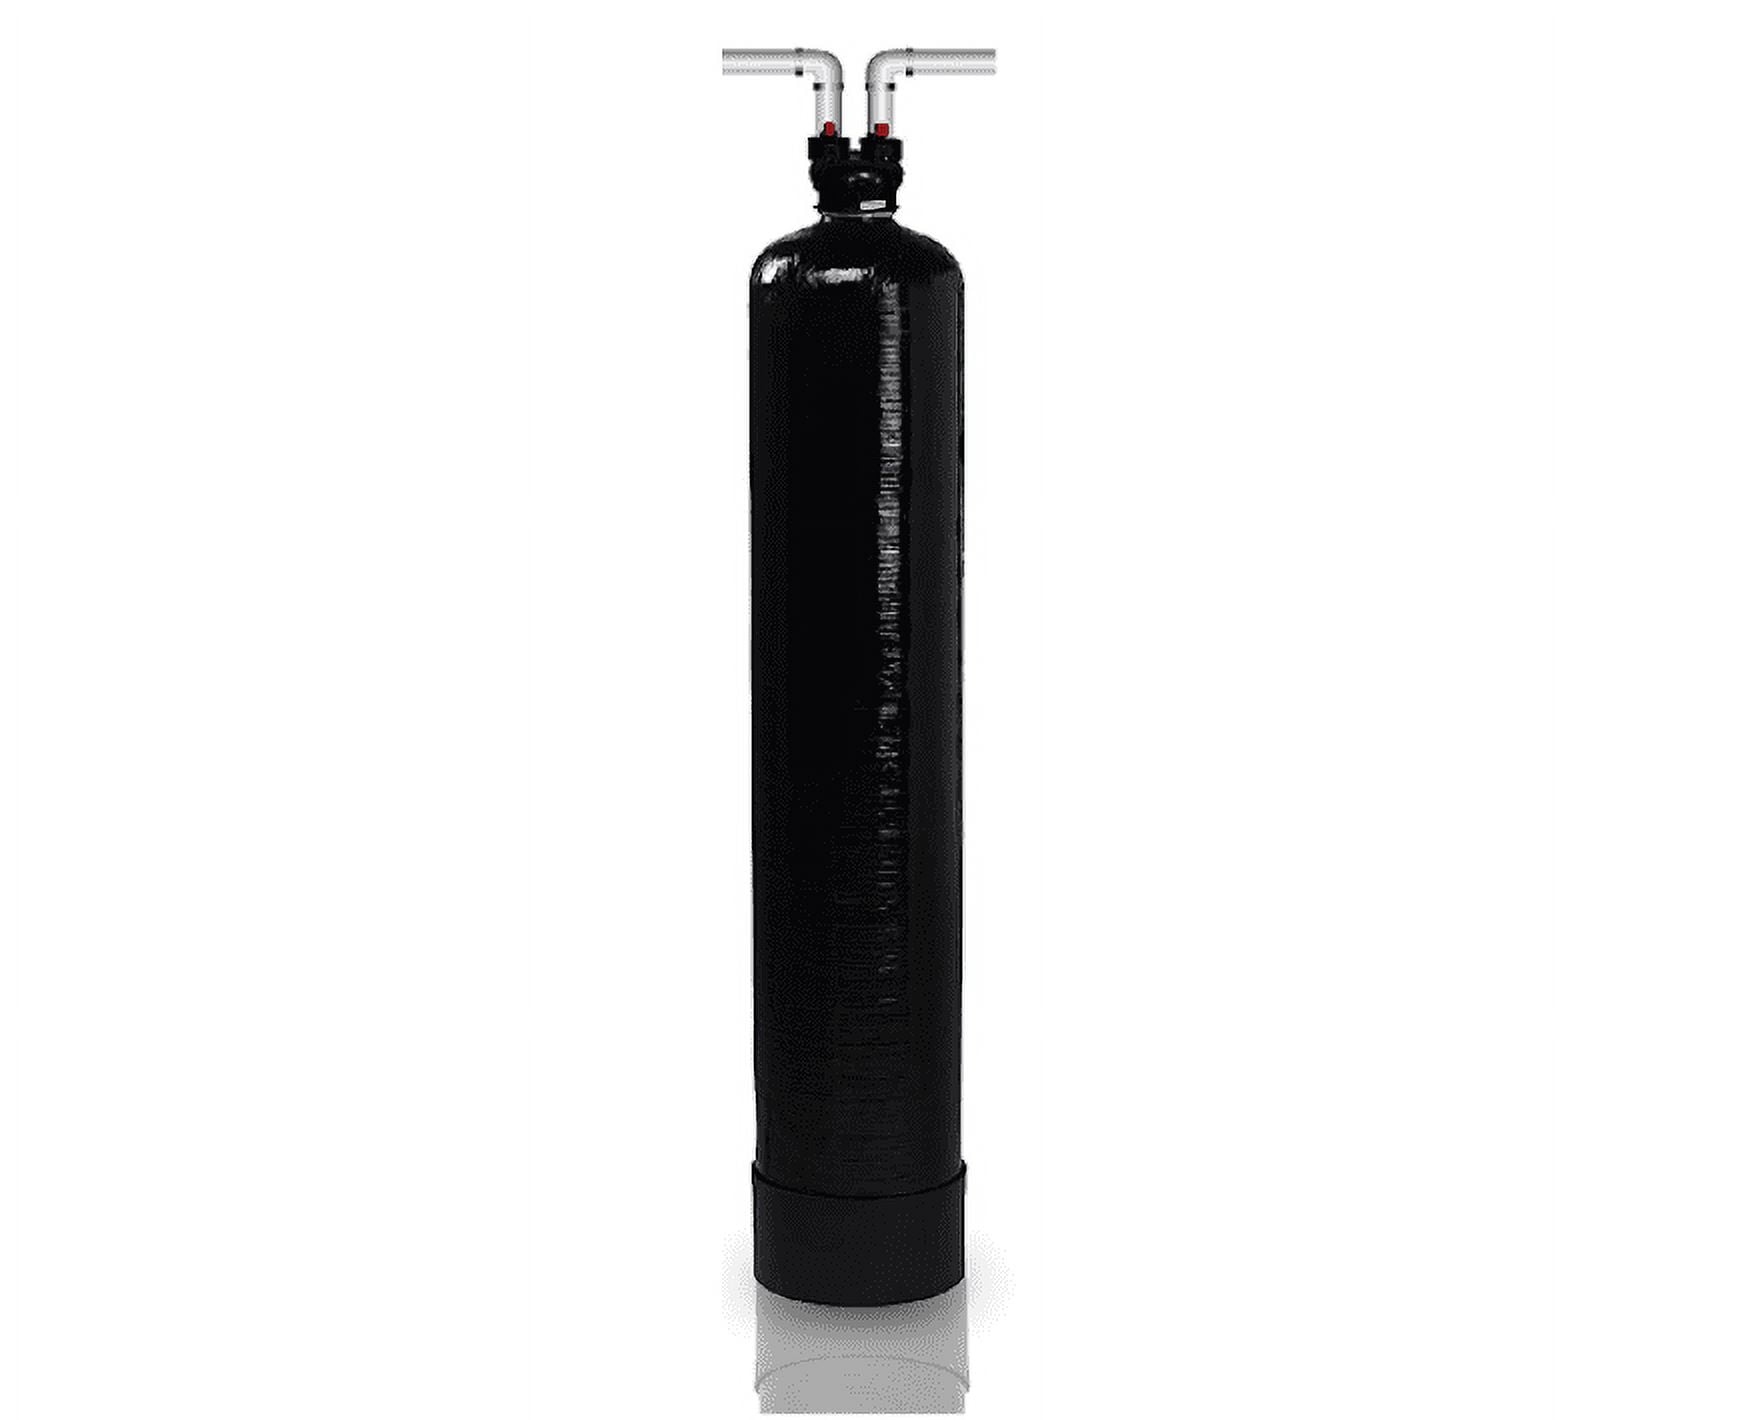 pH Balancing Filter 11 With ¼” QC Fittings